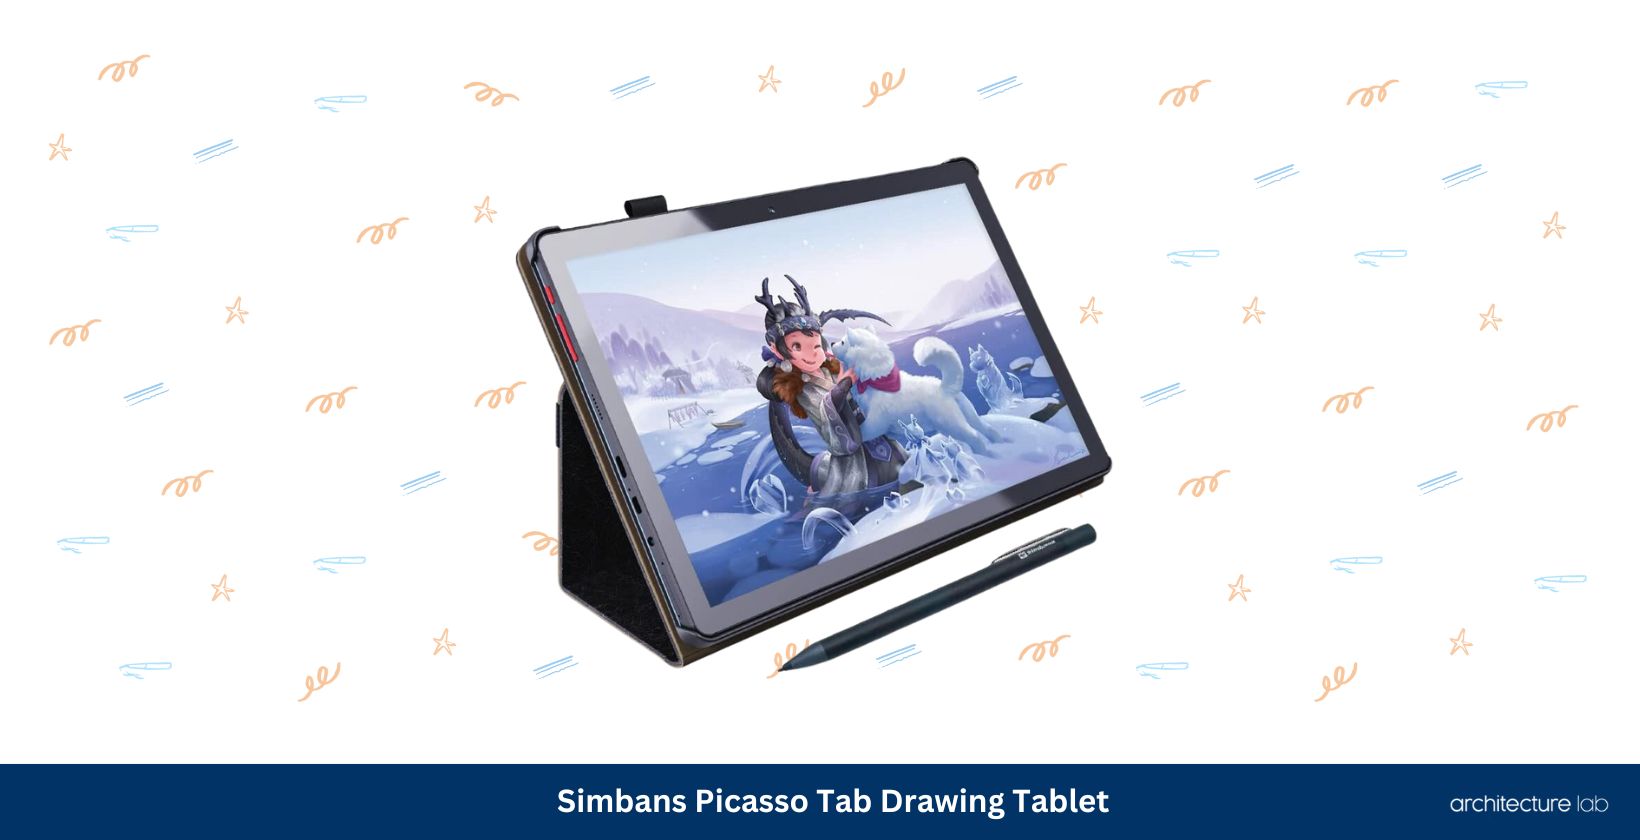 Simbans picasso tab drawing tablet